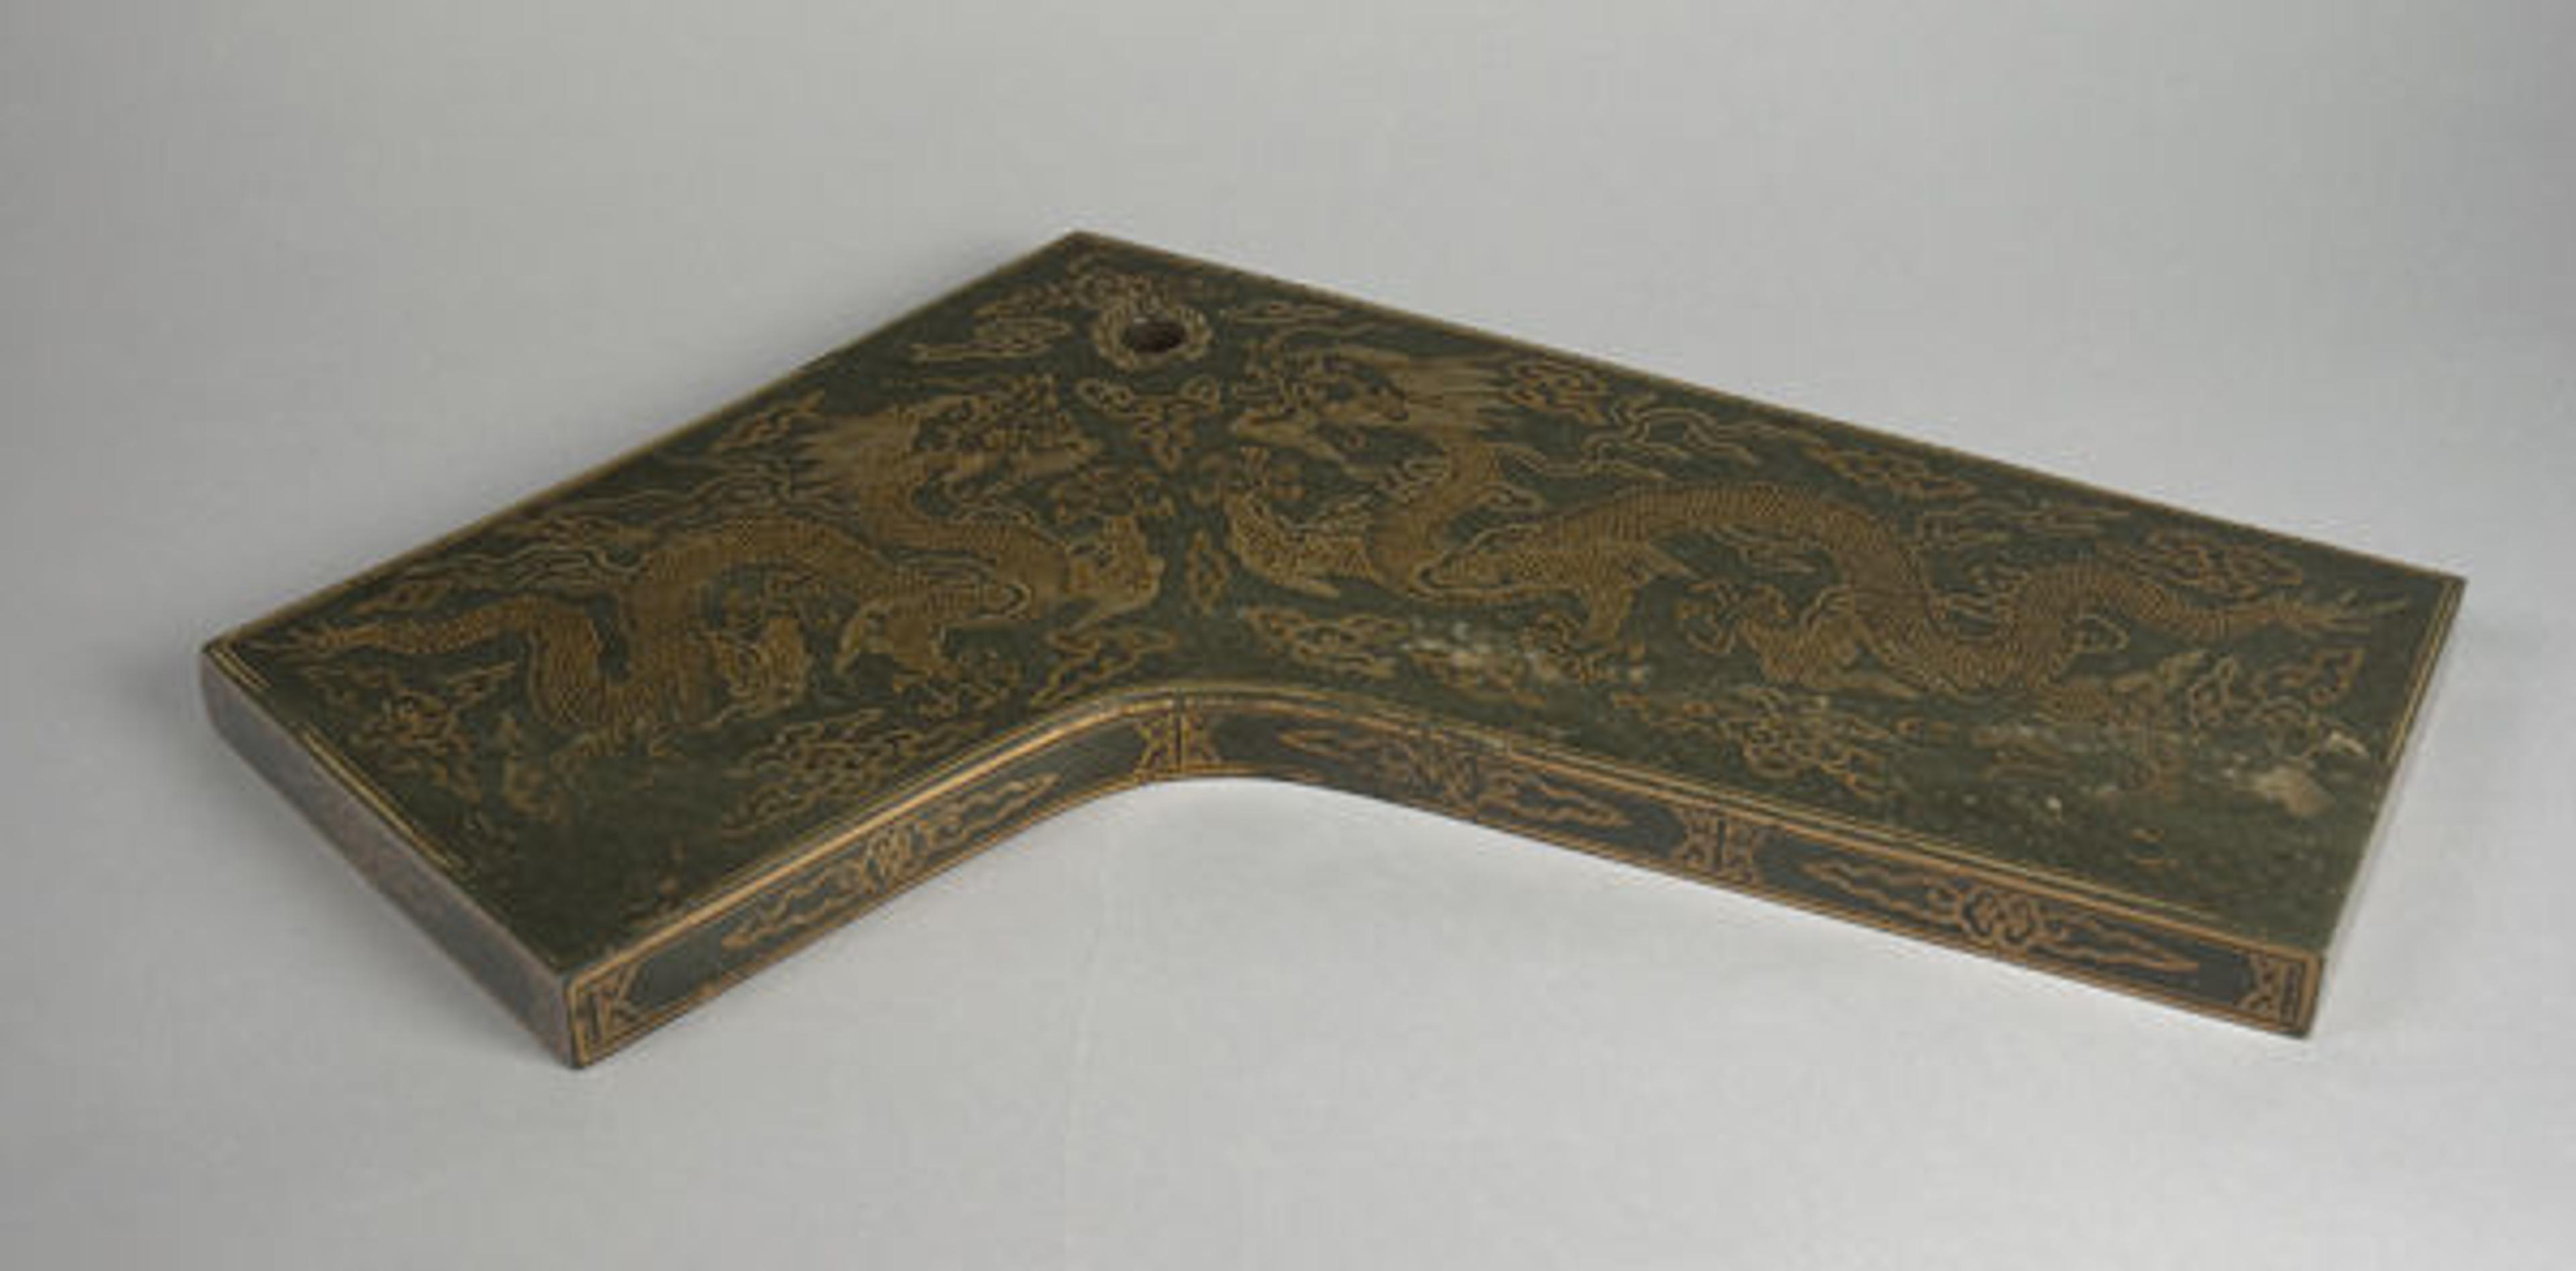 Chime (Qing) for Linzhong (8th note in the 12-note scale), dated 1716. China, Qing dynasty (1644–1911), Kangxi period (1662–1722). Jade with incised gilded design. The Metropolitan Museum of Art, New York, Gift of Major Louis Livingston Seaman, 1903 (03.15.1)